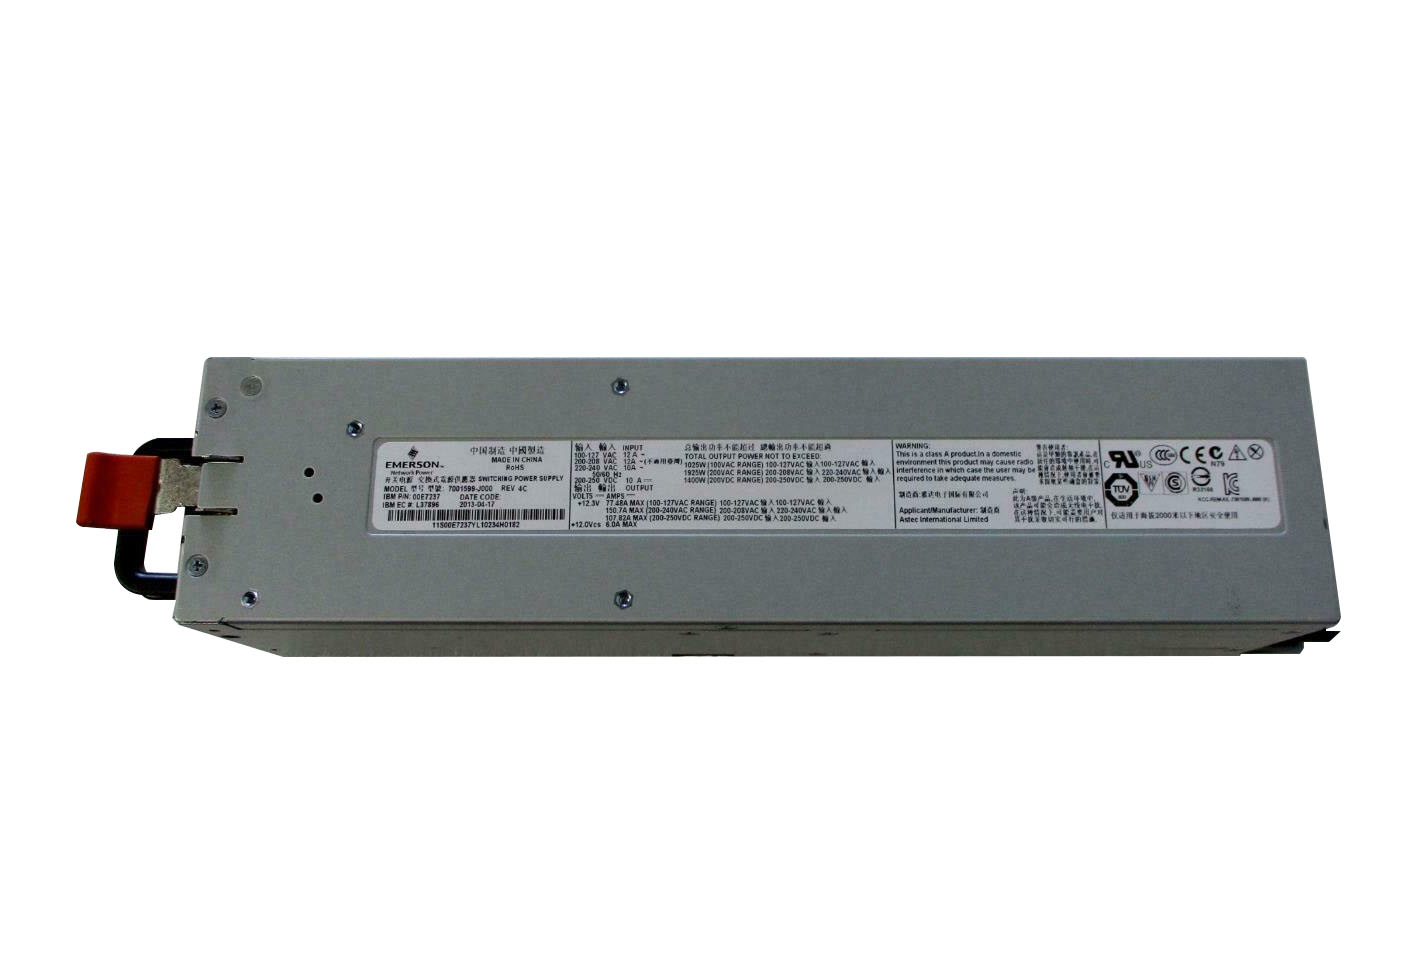 Emerson 7001599-J000 1925-Watts 200-240V AC 10A 50-60Hz Power Supply for P770 / 720 / 710